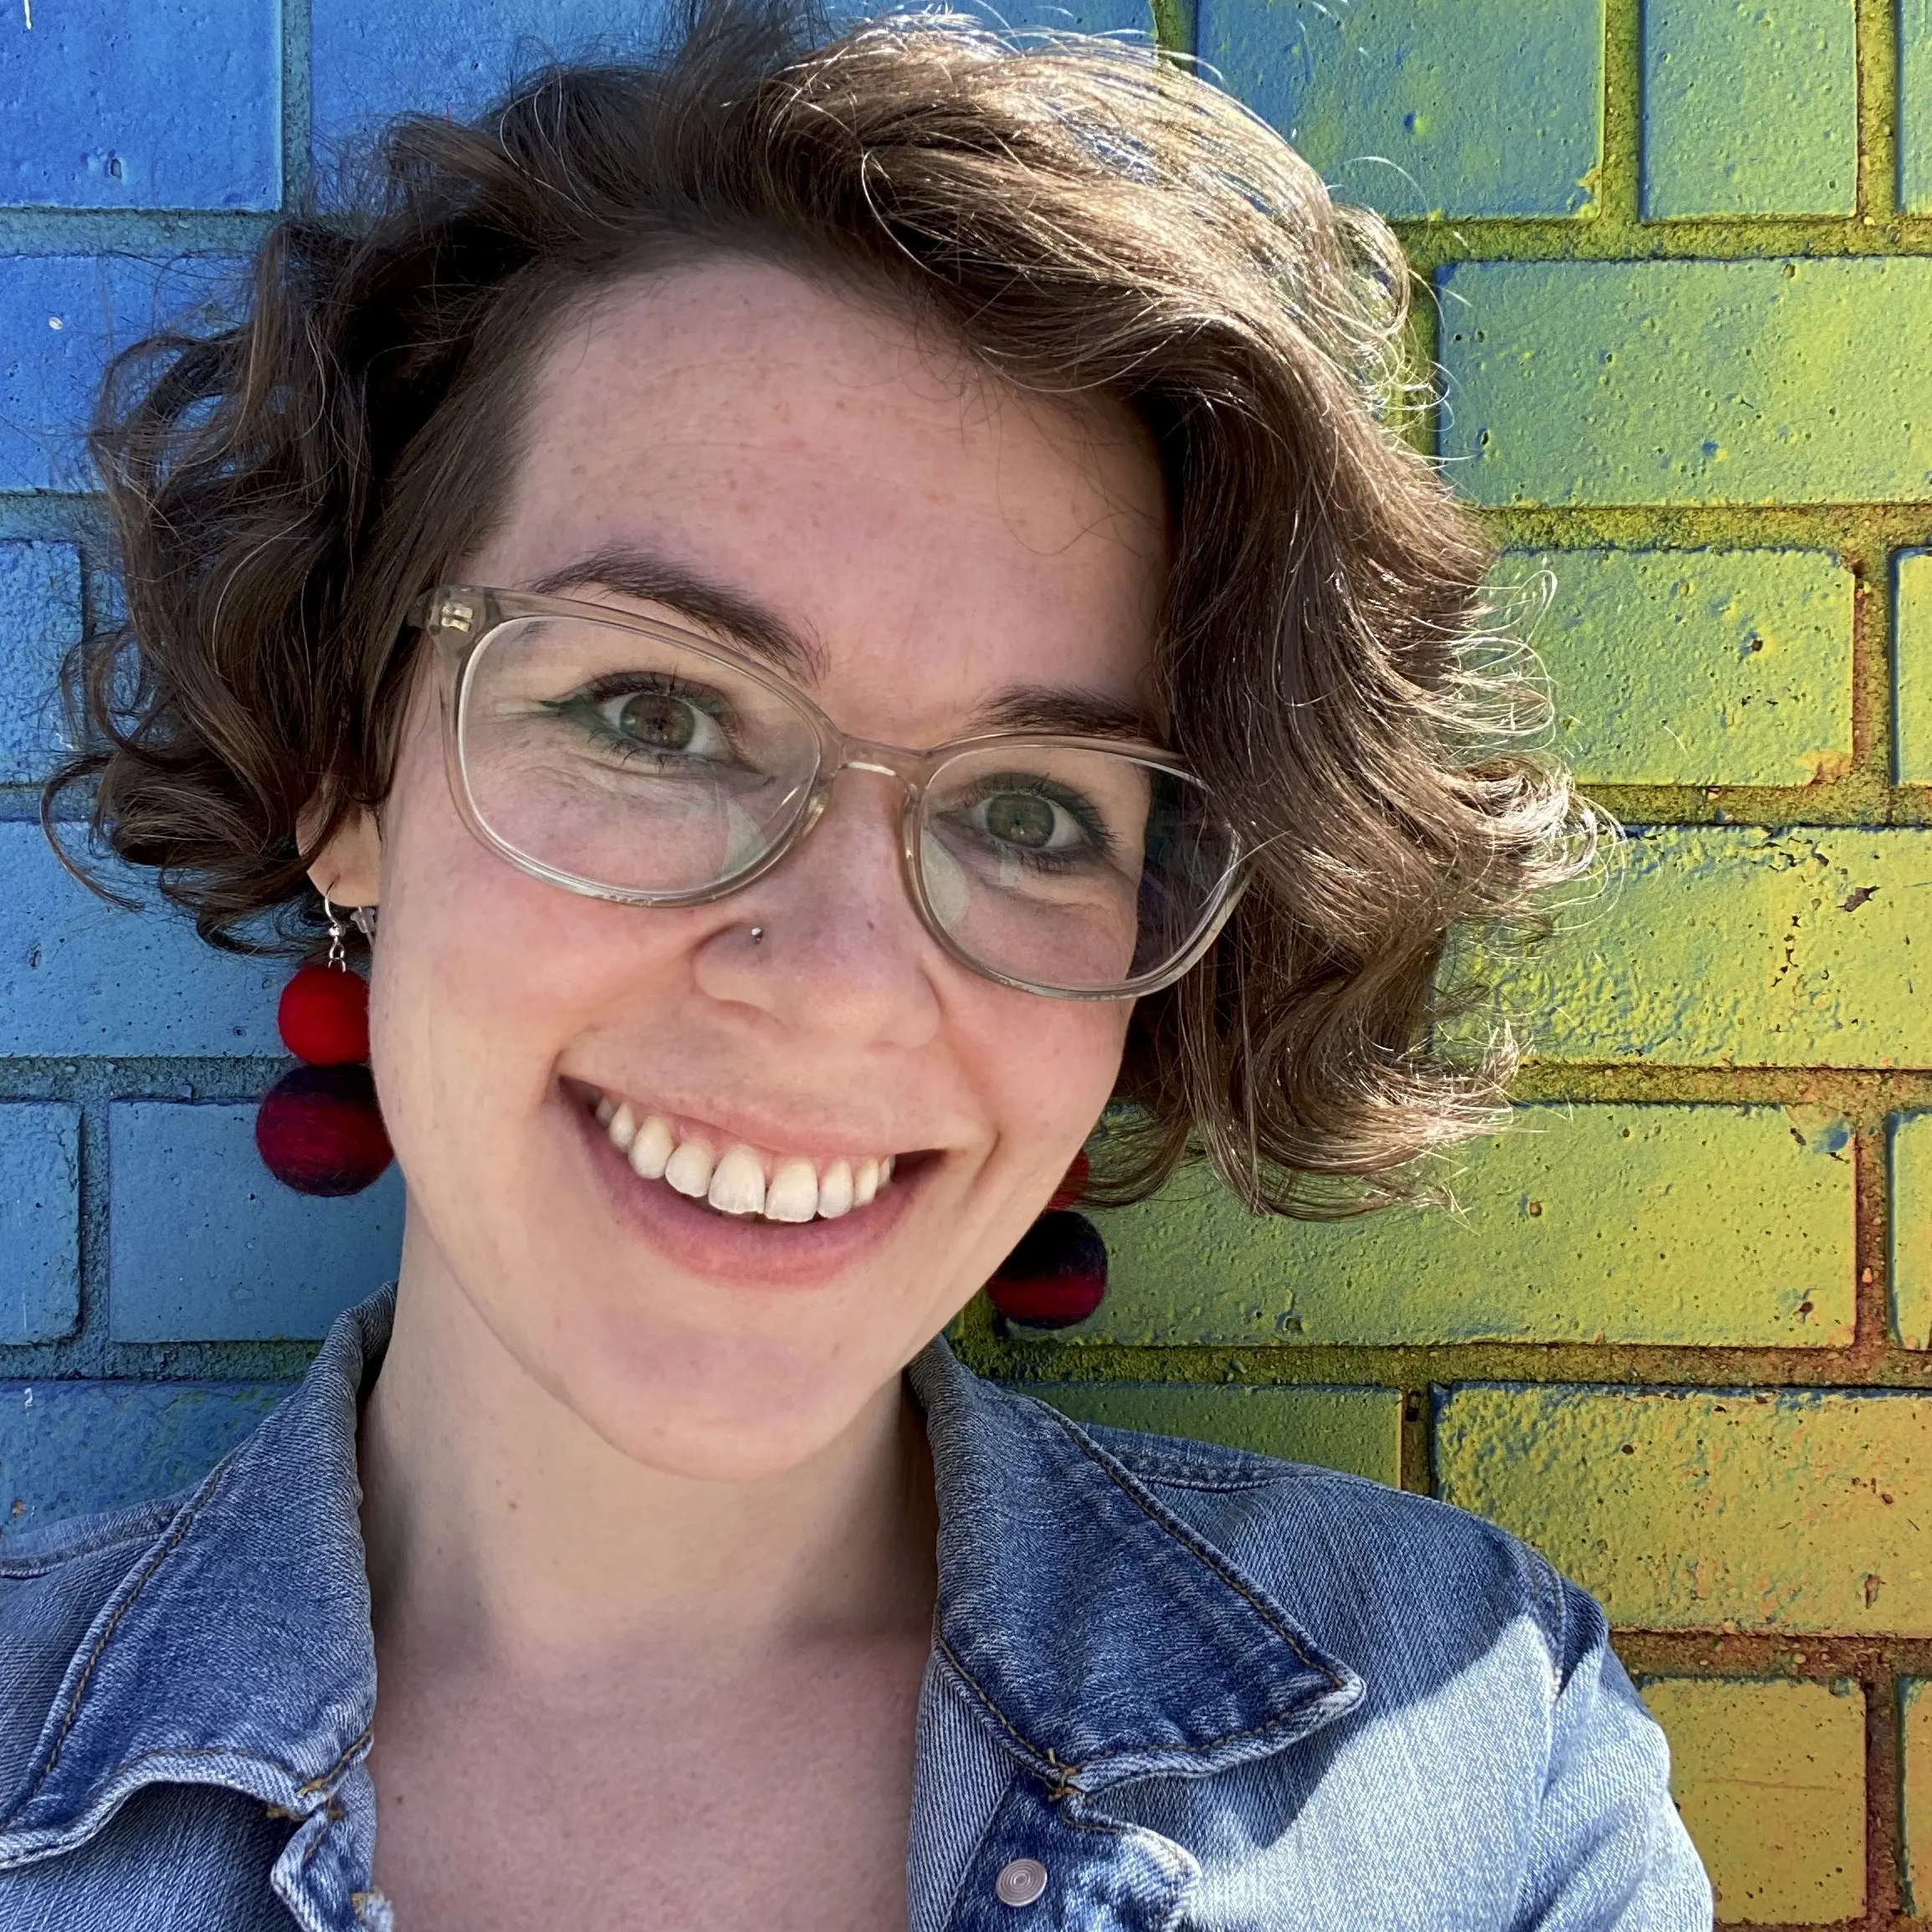 A light-skinned women with ear-length brown hair smiles at the camera in front of a colorful brick wall. She wears wide-rim glasses and red earrings.